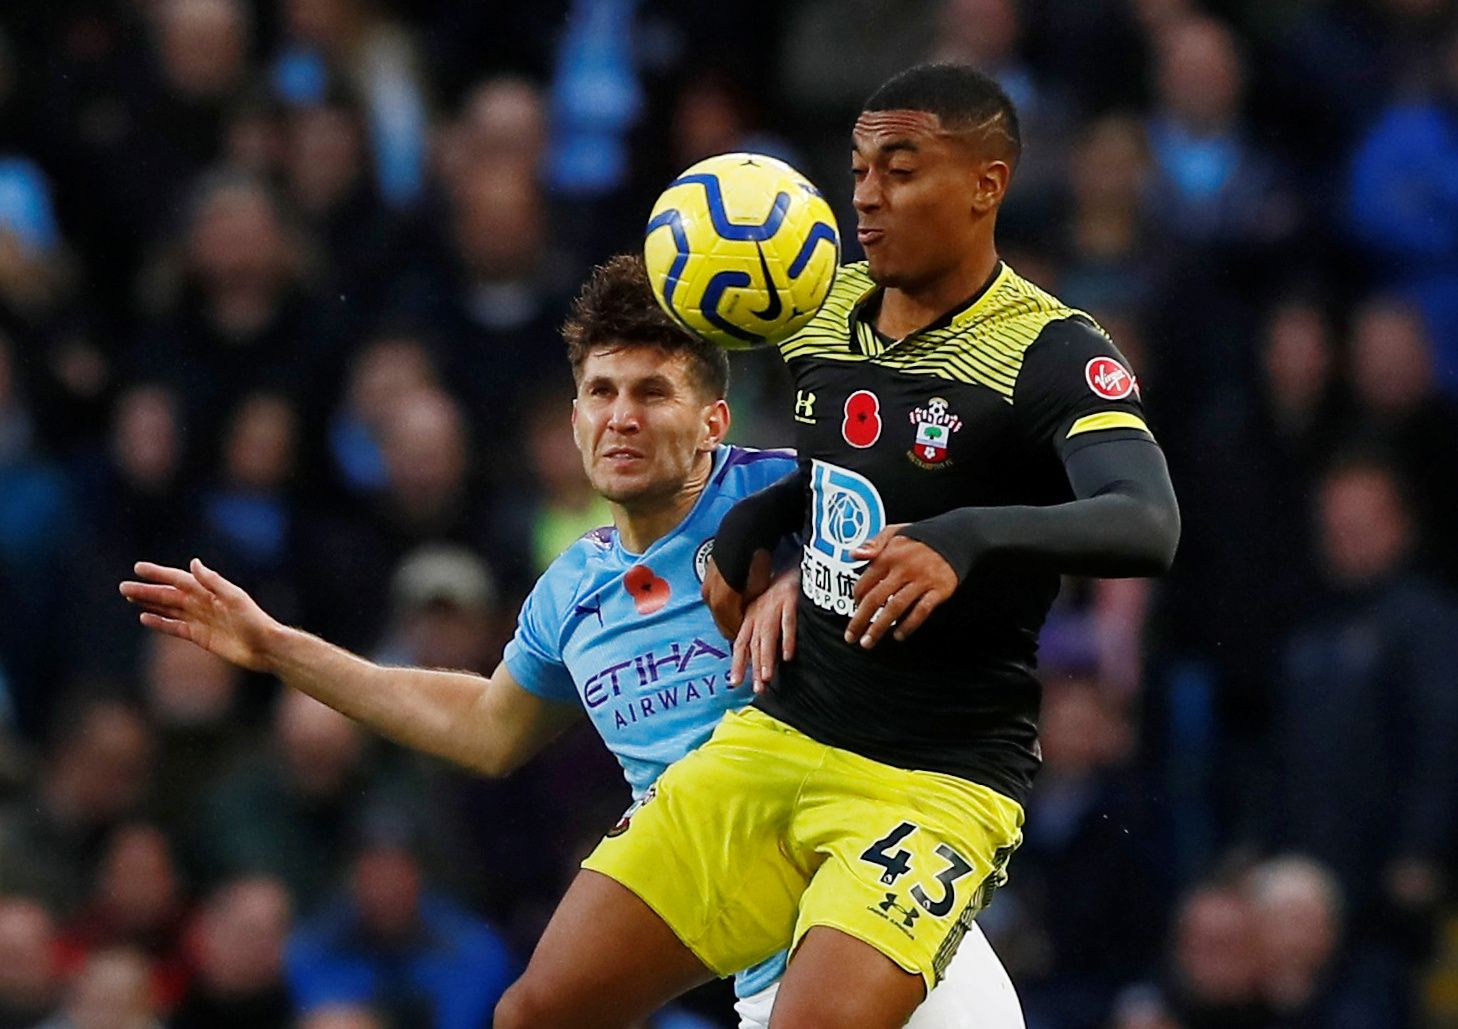 Soccer Football - Premier League - Manchester City v Southampton - Etihad Stadium, Manchester, Britain - November 2, 2019  Southampton's Yan Valery in action with Manchester City's John Stones   Action Images via Reuters/Jason Cairnduff  EDITORIAL USE ONLY. No use with unauthorized audio, video, data, fixture lists, club/league logos or 